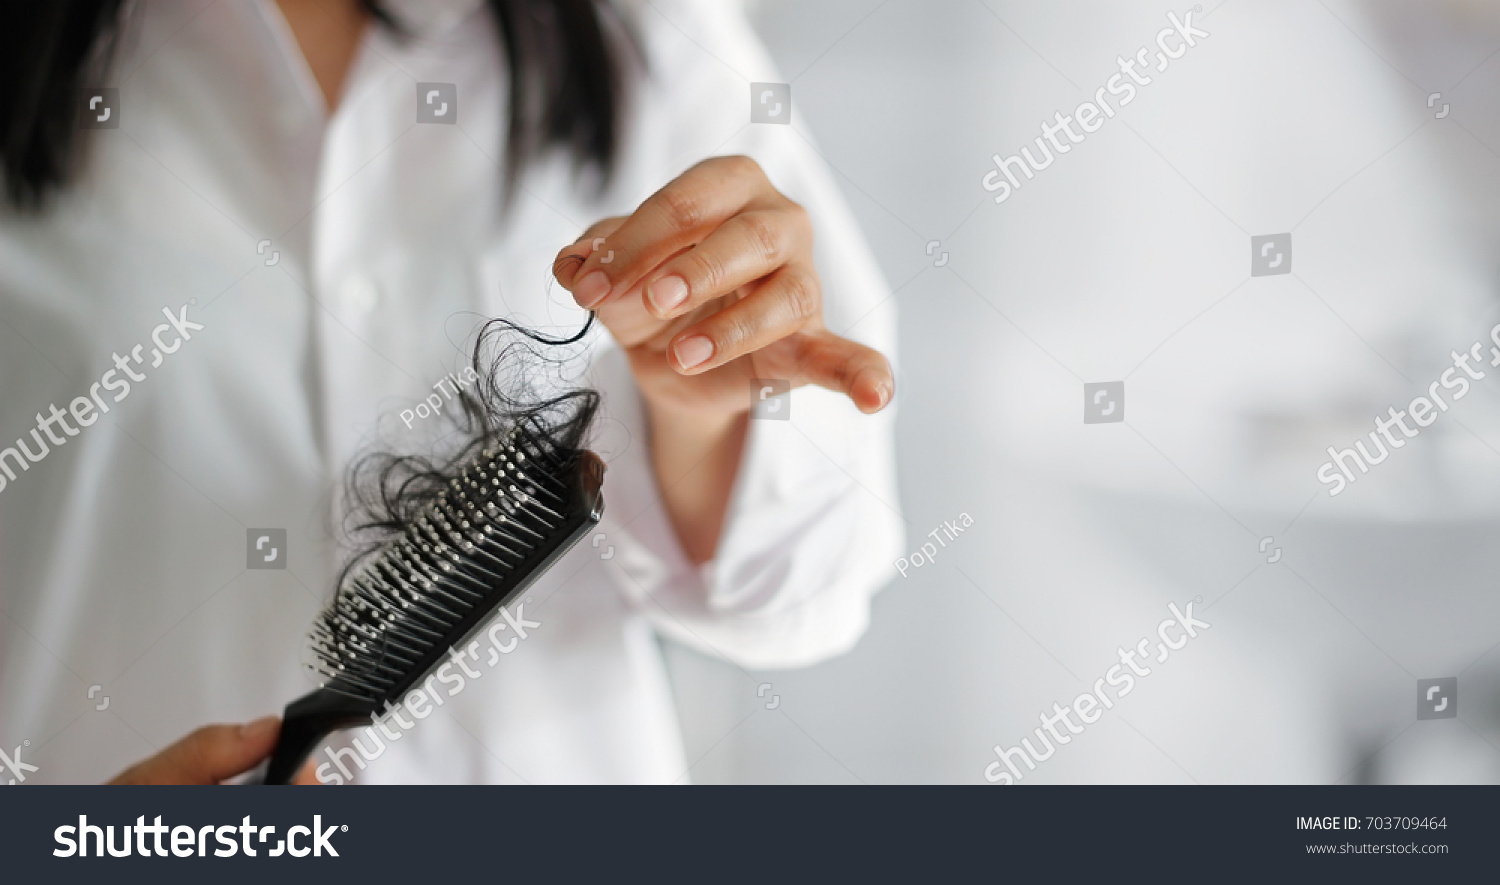 woman losing hair on hairbrush in hand, soft focus #703709464